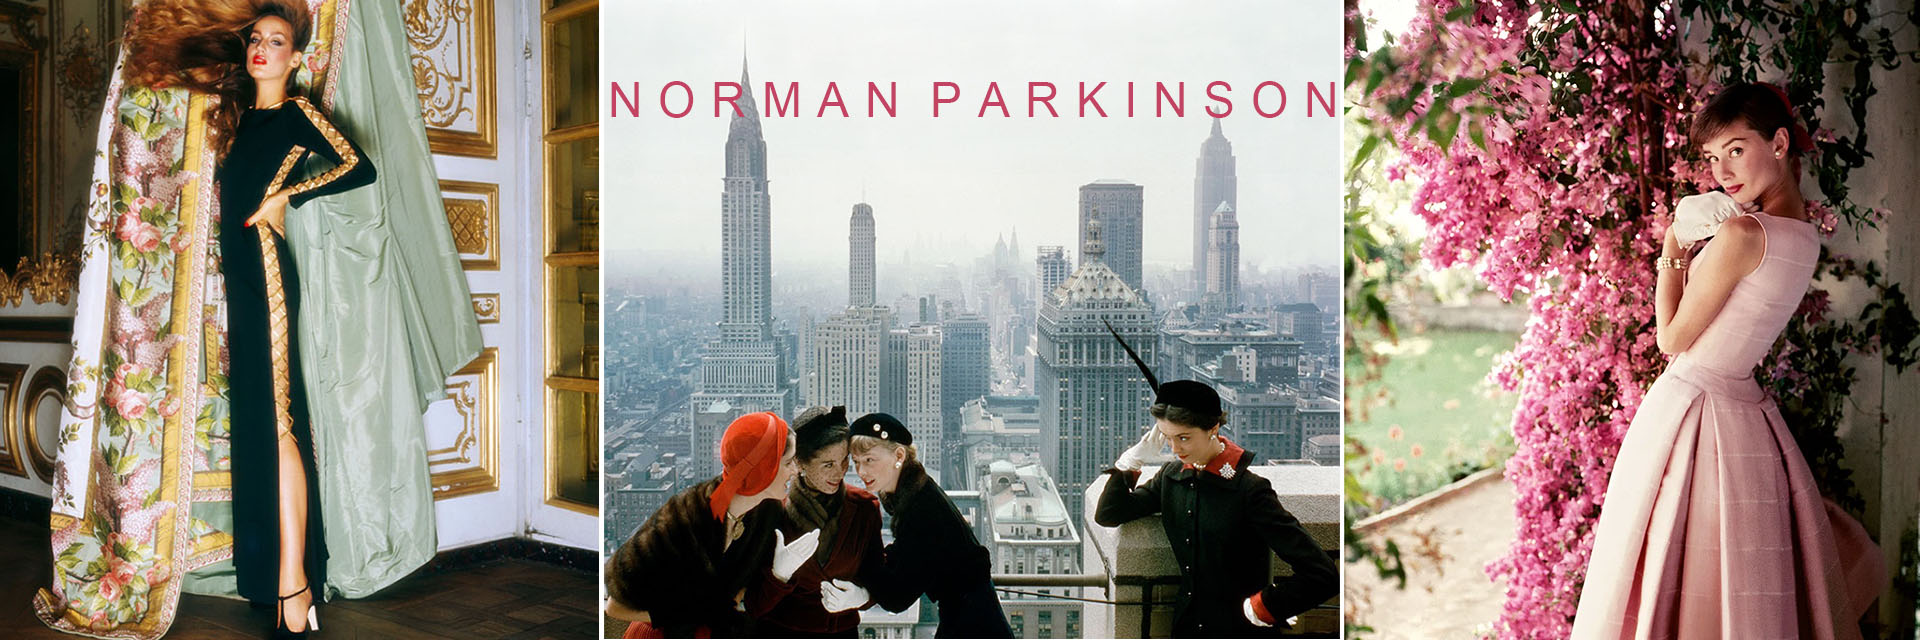 Norman Parkinson (1913-1990) was the Twentieth Century’s most celebrated fashion photographer. He pioneered epic storytelling in his images, taking portrait and fashion photography beyond the stiff formality of his predecessors and injecting an easy and casual elegance into the art.  His photographs created the age of the supermodel and made him the photographer of choice for celebrities, artists, Presidents and Prime Ministers. He was a permanent fixture at historic moments photographing the British Royal Family, in private and public, as well as leading figures from the worlds of film, theatre, and music.  Subjects include Audrey Hepburn, The Beatles, Twiggy, Grace Coddington, David Bowie, Iman, Jerry Hall and countless others. In a career that spanned seven decades, Parkinson dazzled the world and inspired his peers with sparkling inventiveness as a portrait and fashion photographer.  Parkinson worked for a wide range of publications, notably Vogue, Harper’s Bazaar, Town & Country and other international magazines, which brought him worldwide recognition.